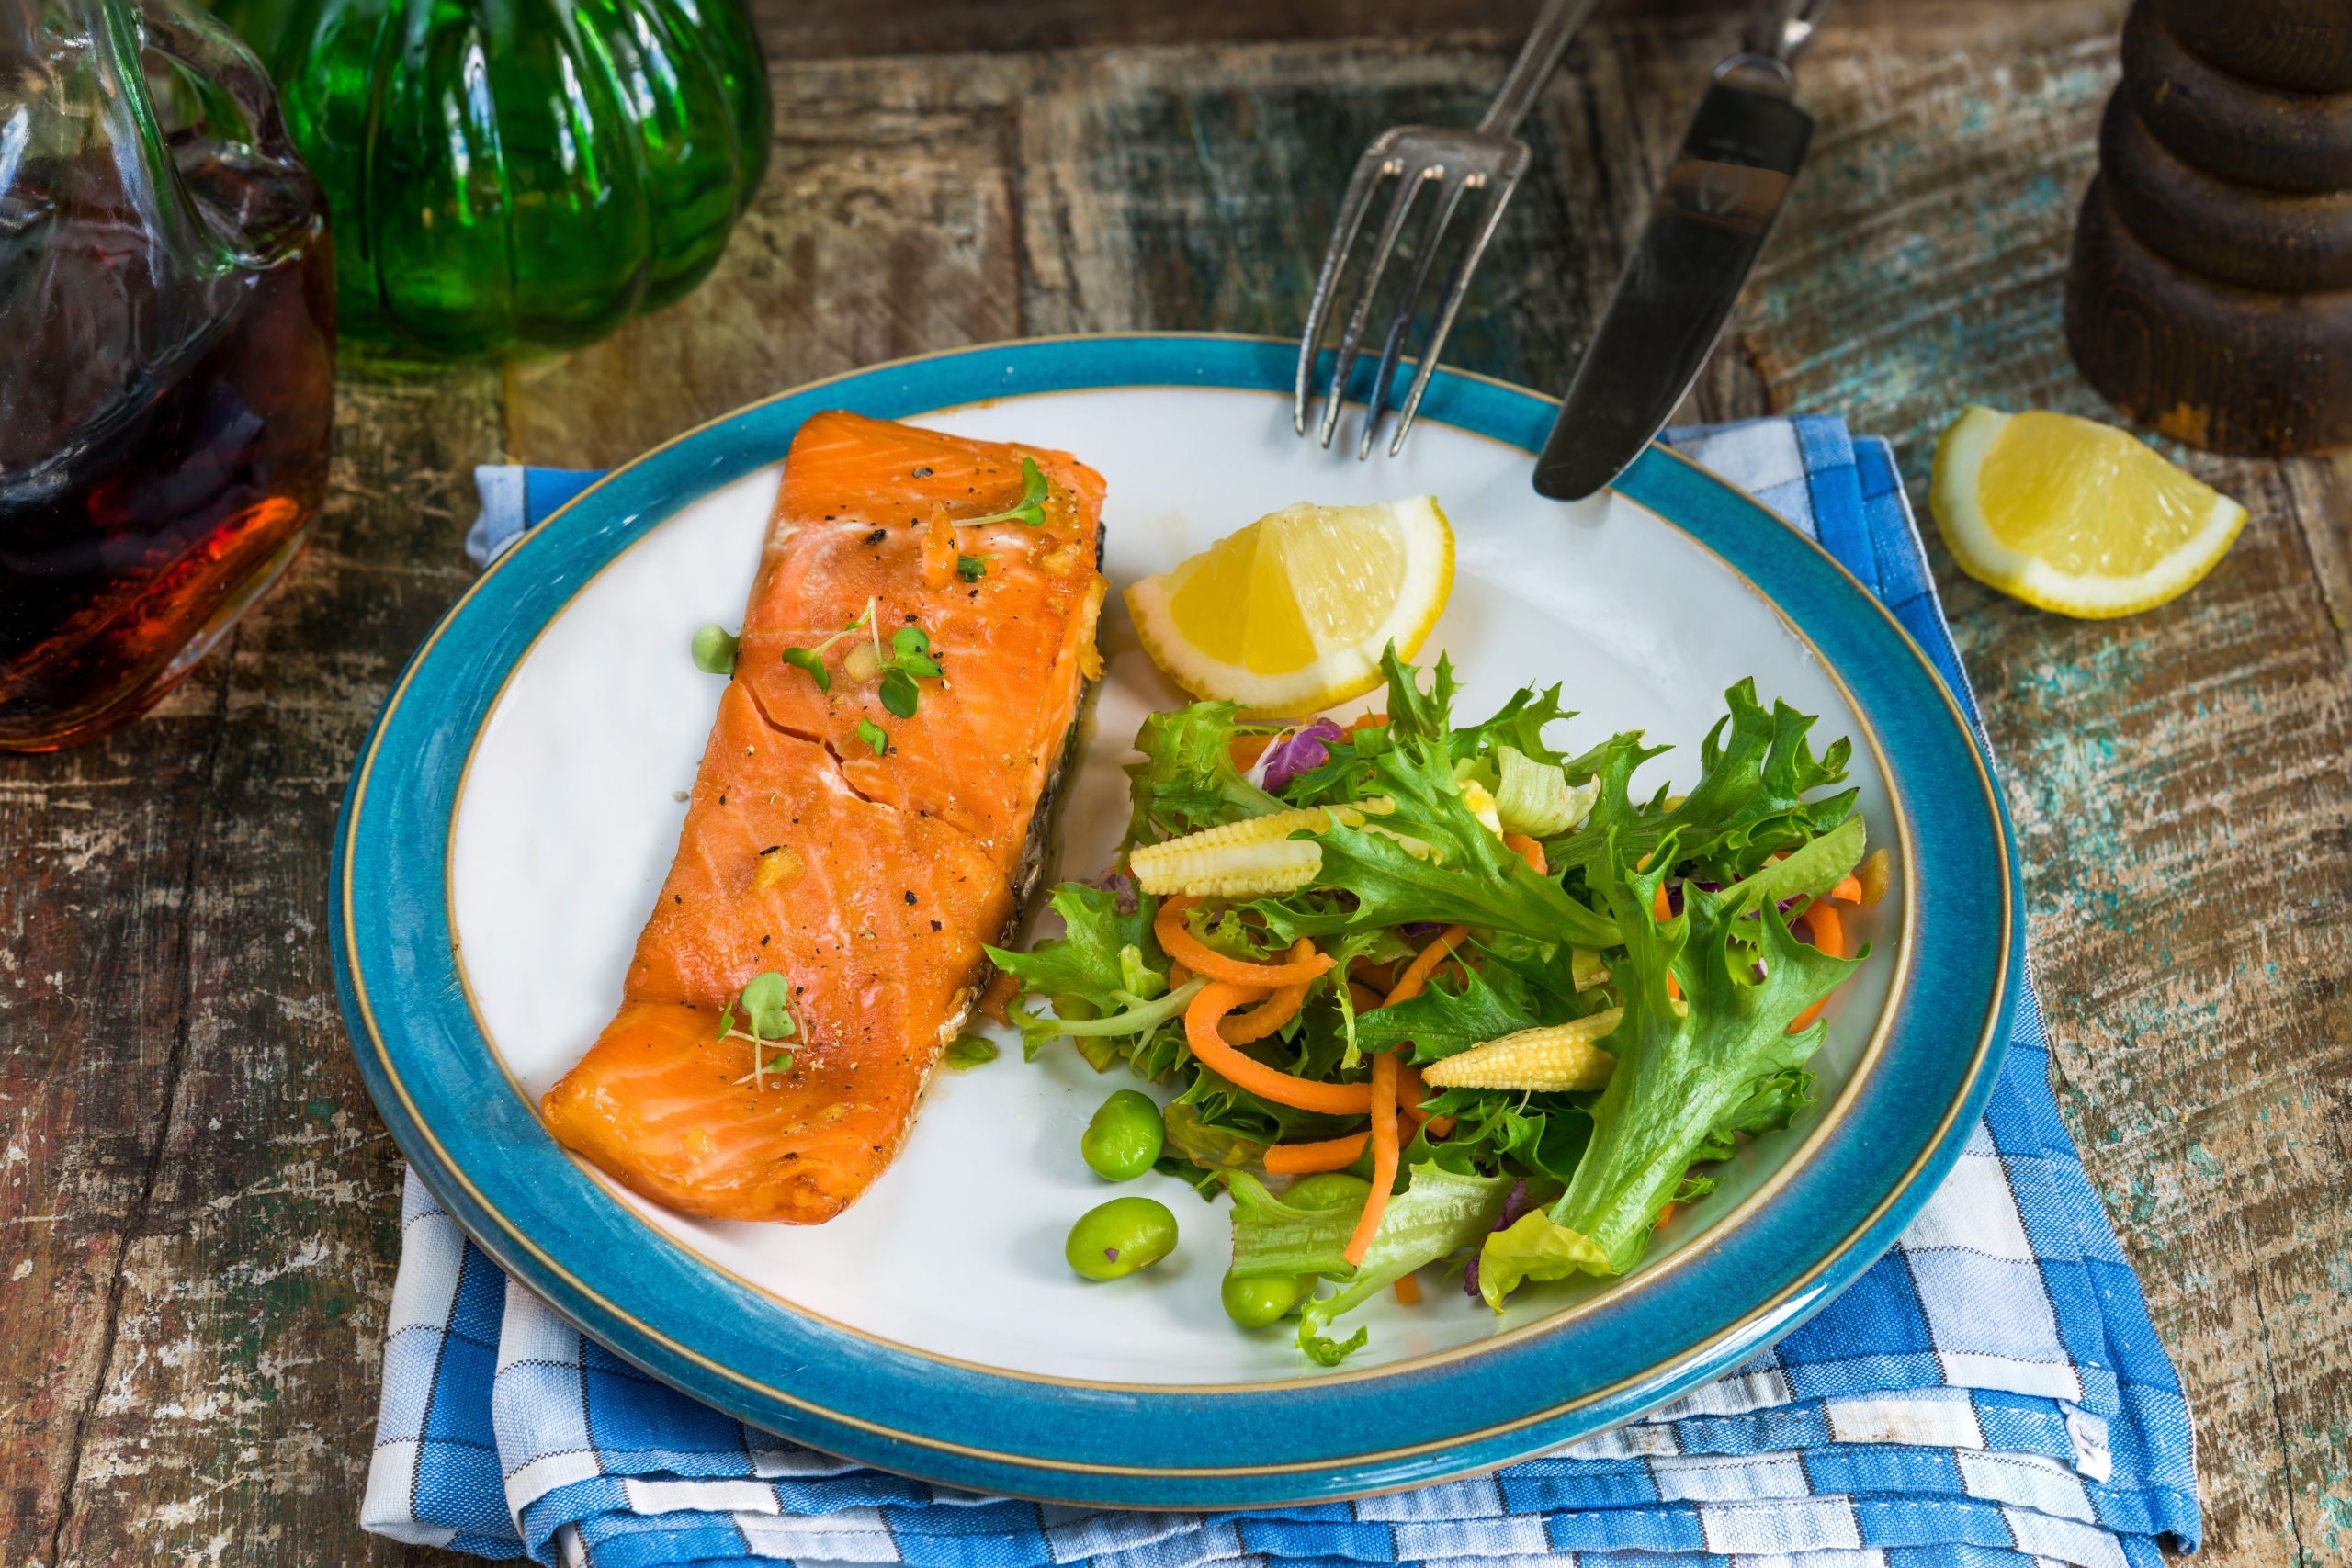 Fuel your movement recipe of the month: Maple-glazed salmon